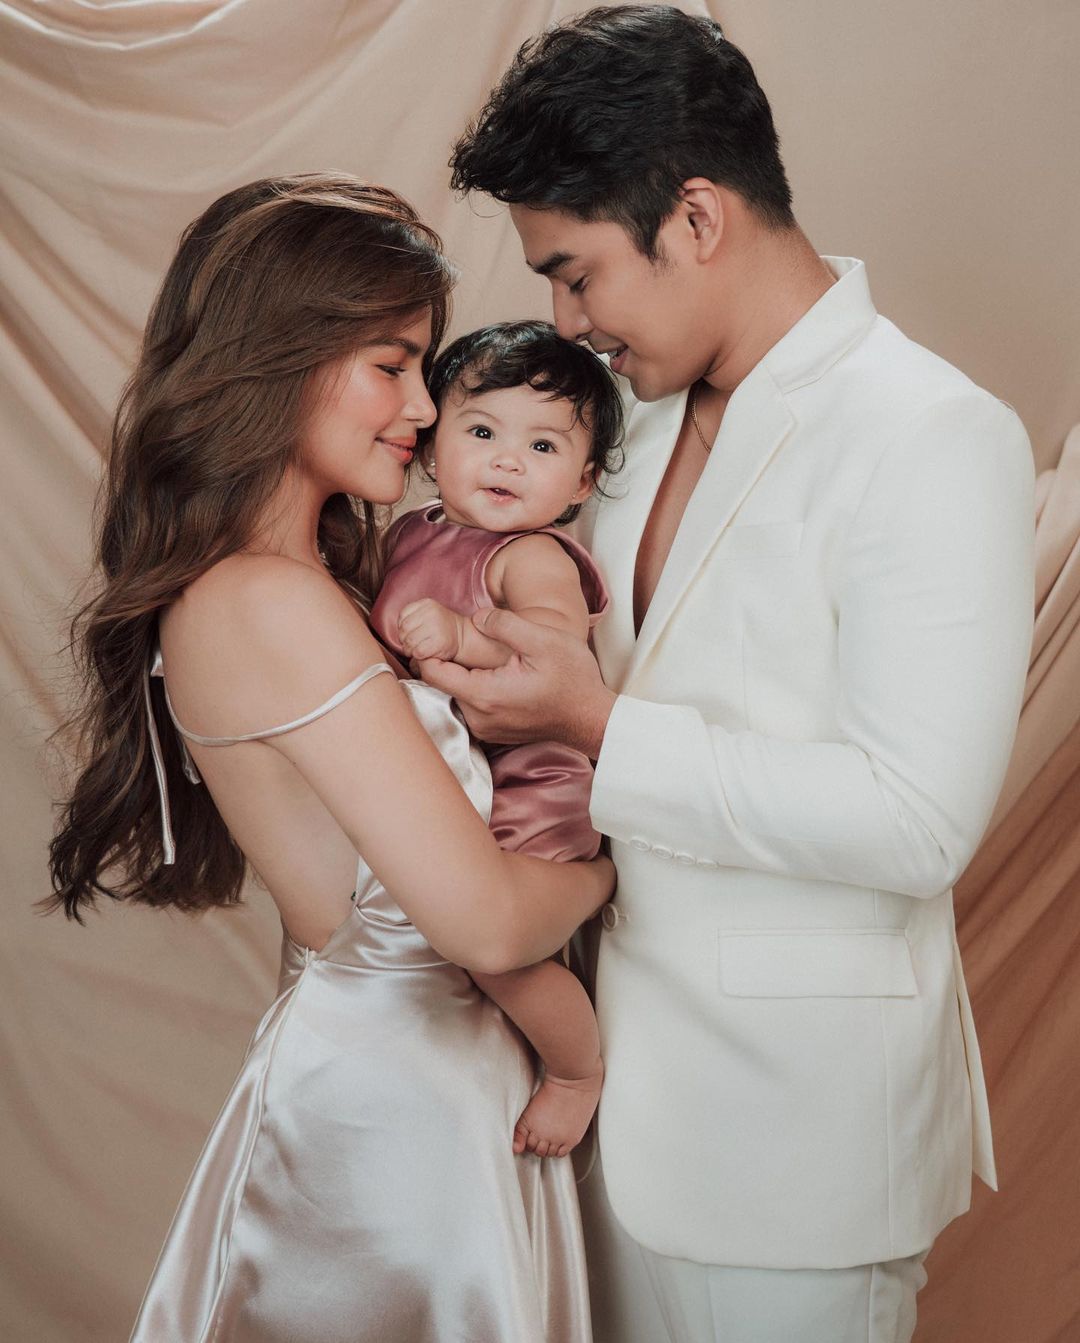 Elisse Joson and McCoy De Leon with their daughter Felize